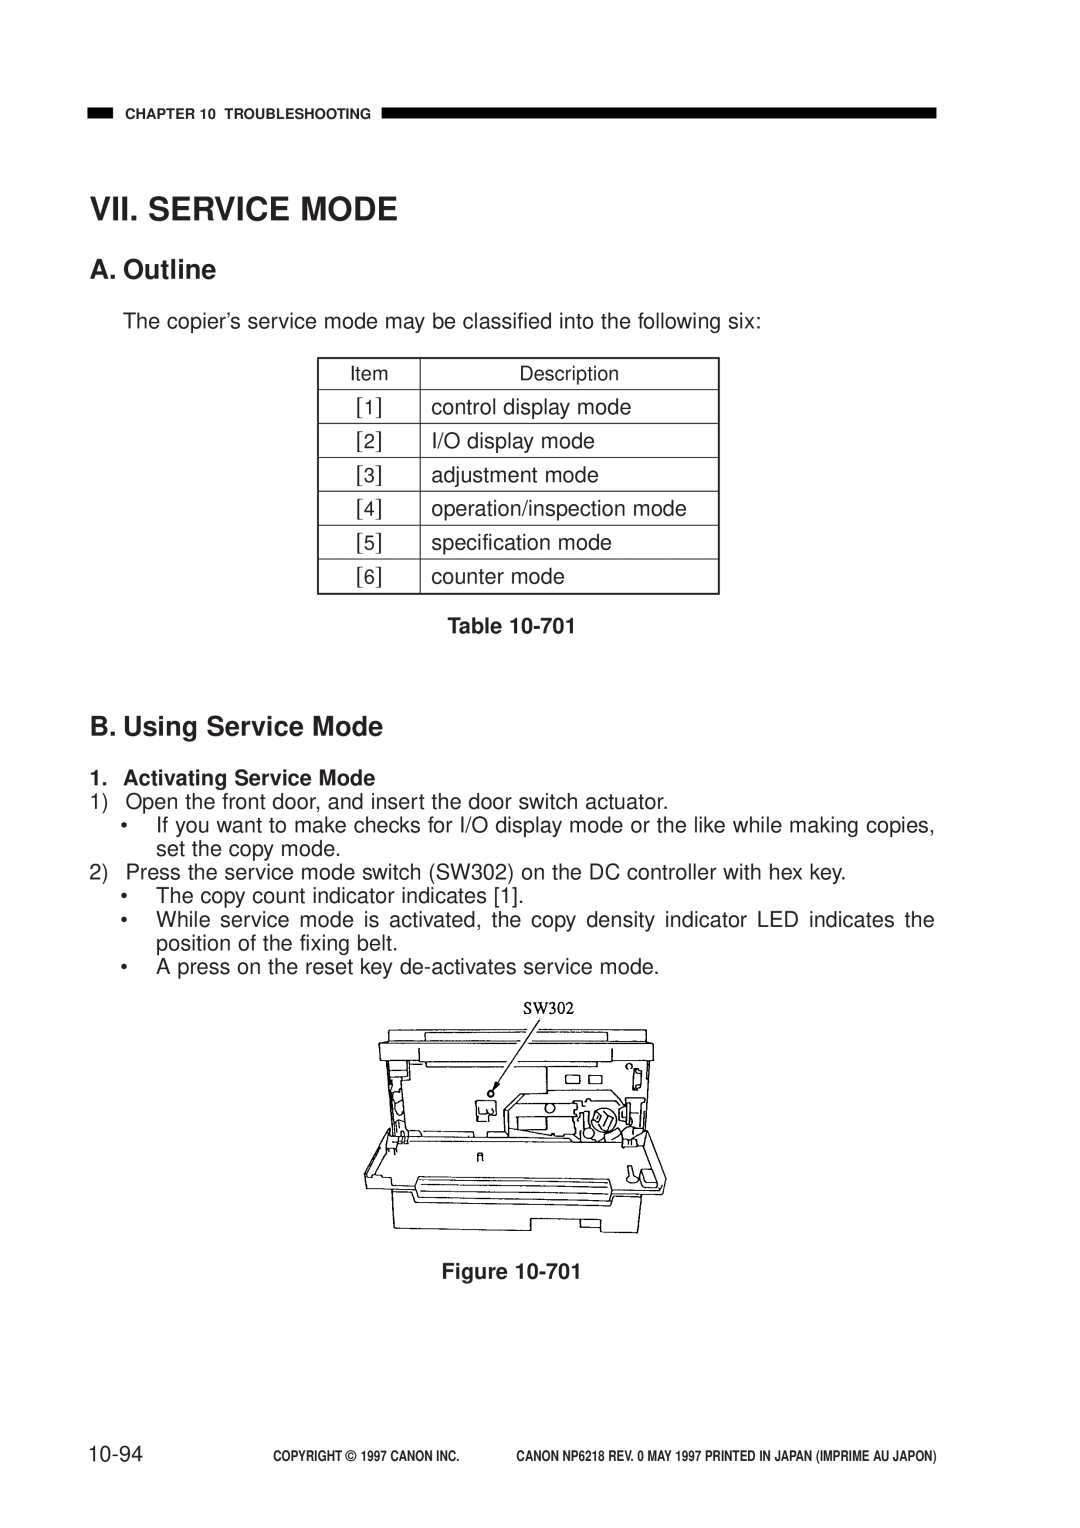 Canon NP6218, FY8-13EX-000 Vii. Service Mode, B. Using Service Mode, Activating Service Mode, 10-94, A. Outline 